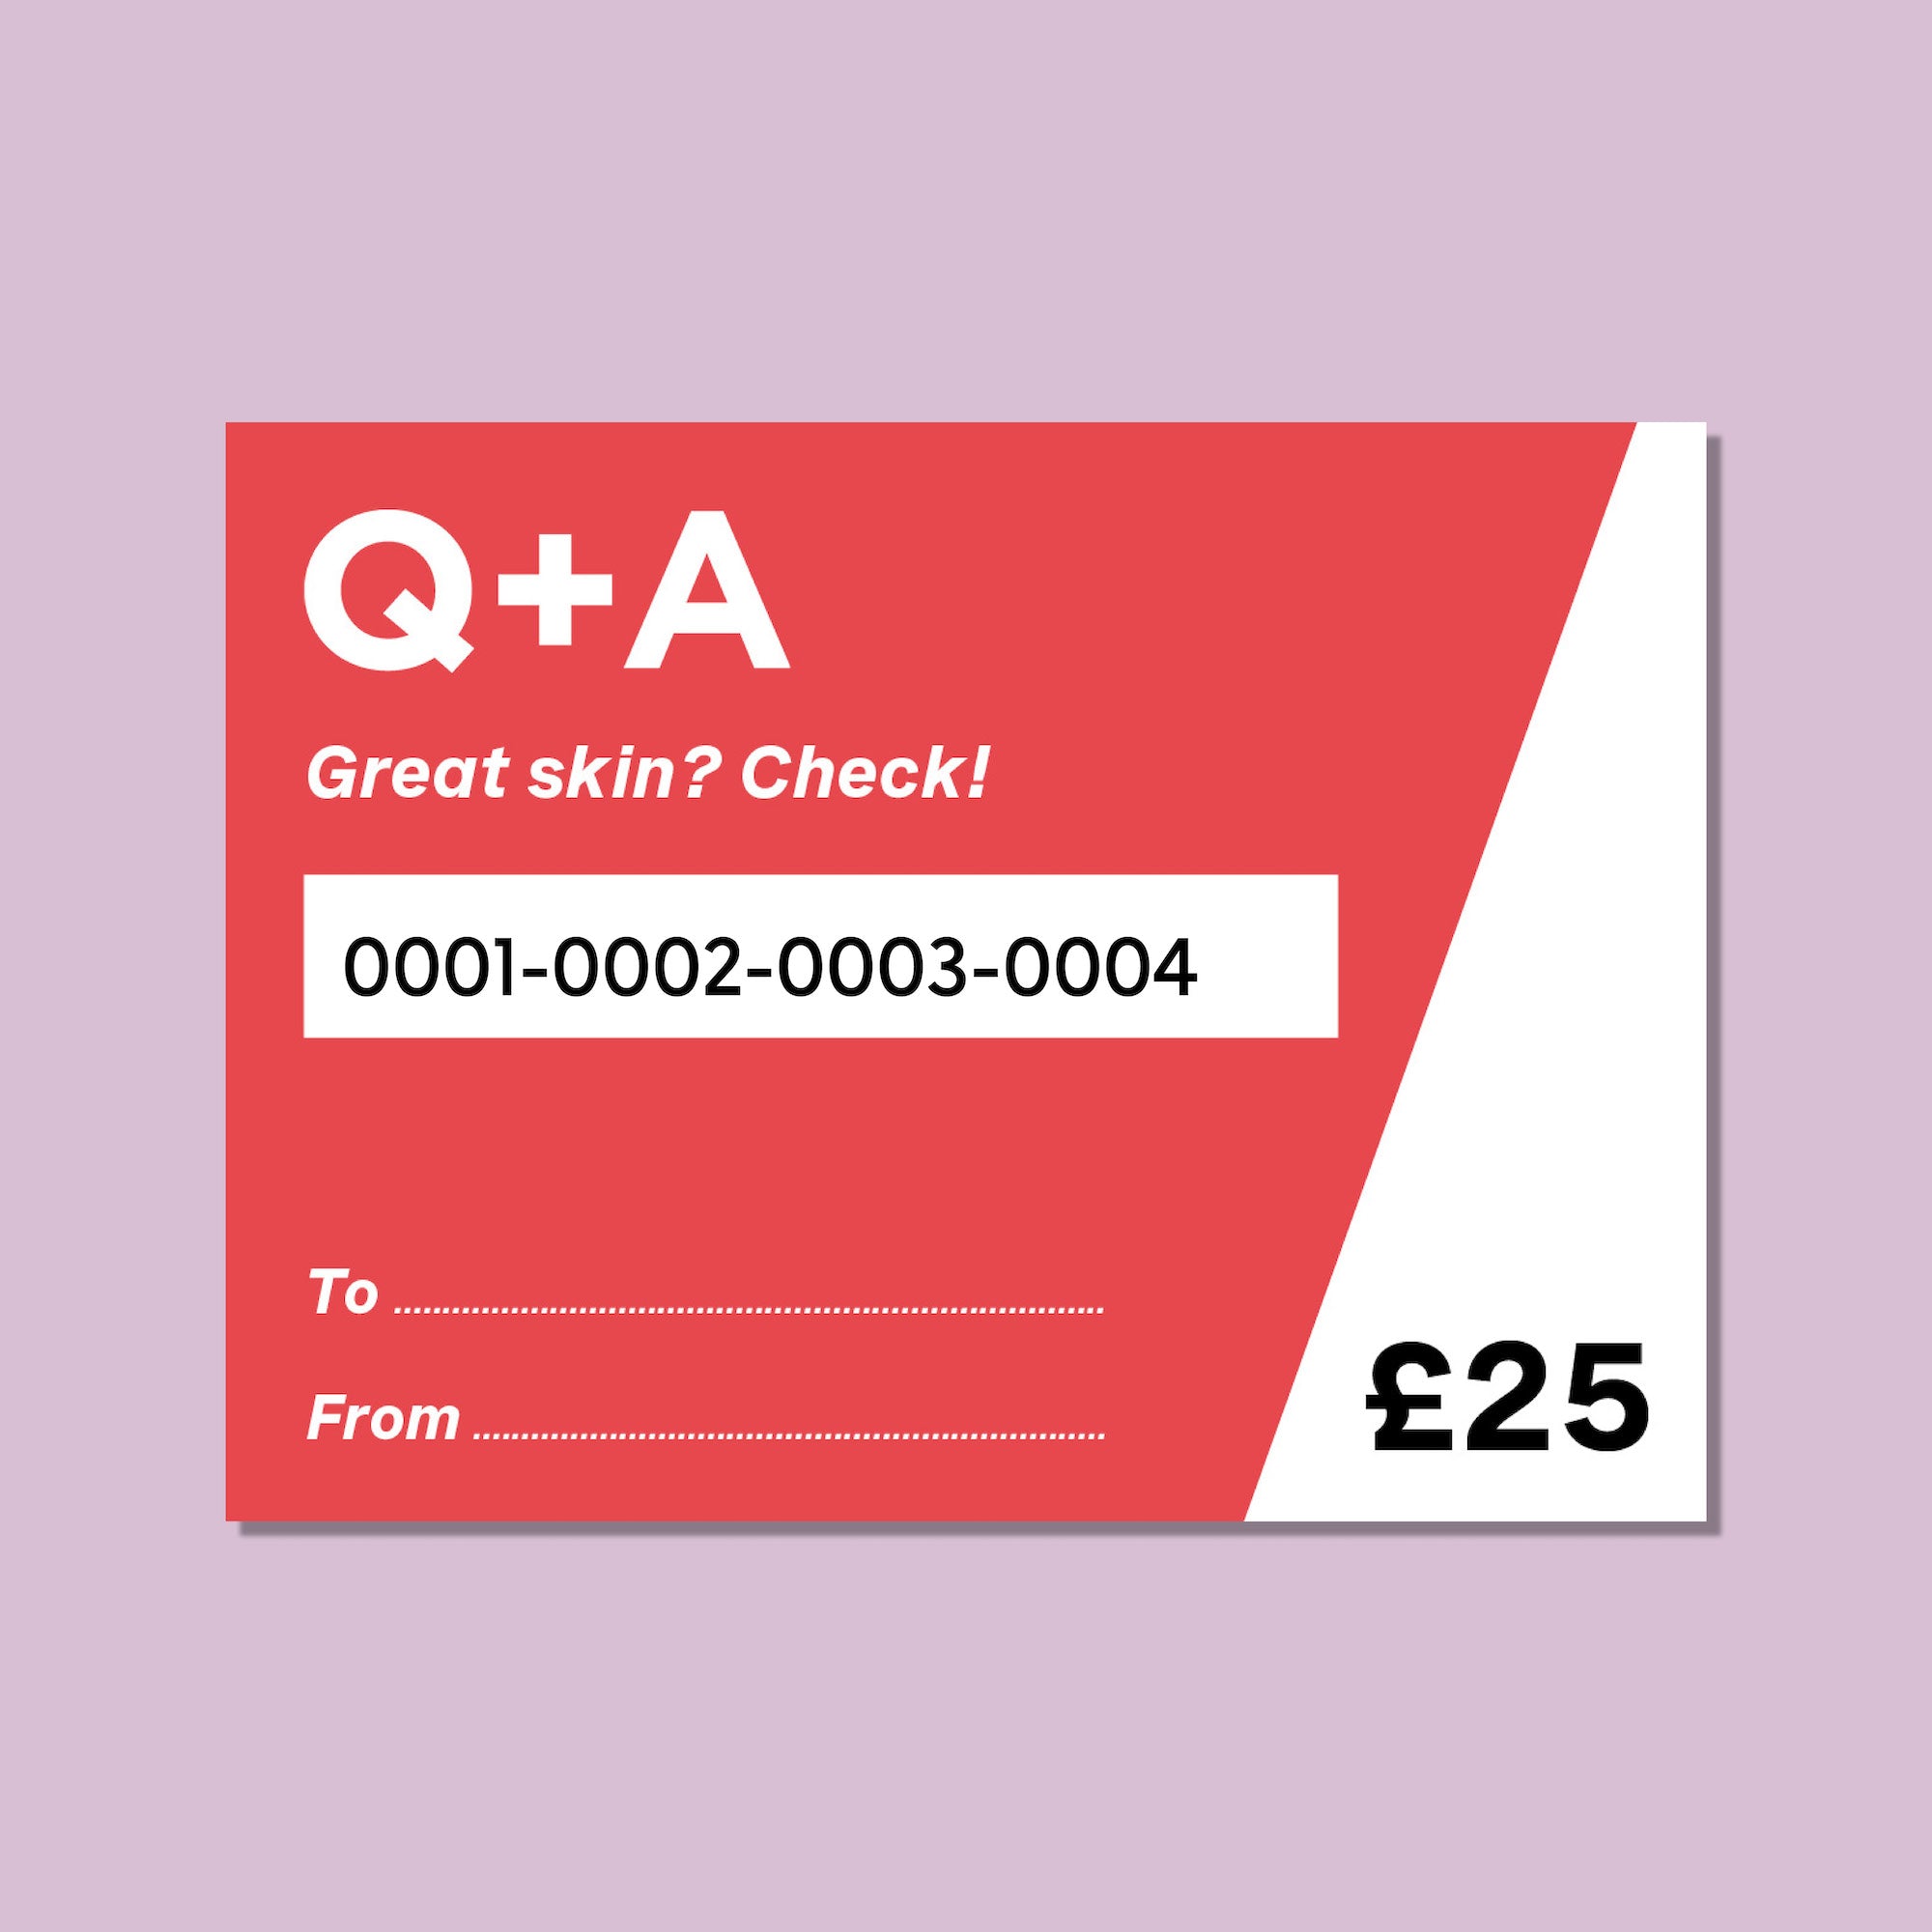 Q+A £25 giftcard